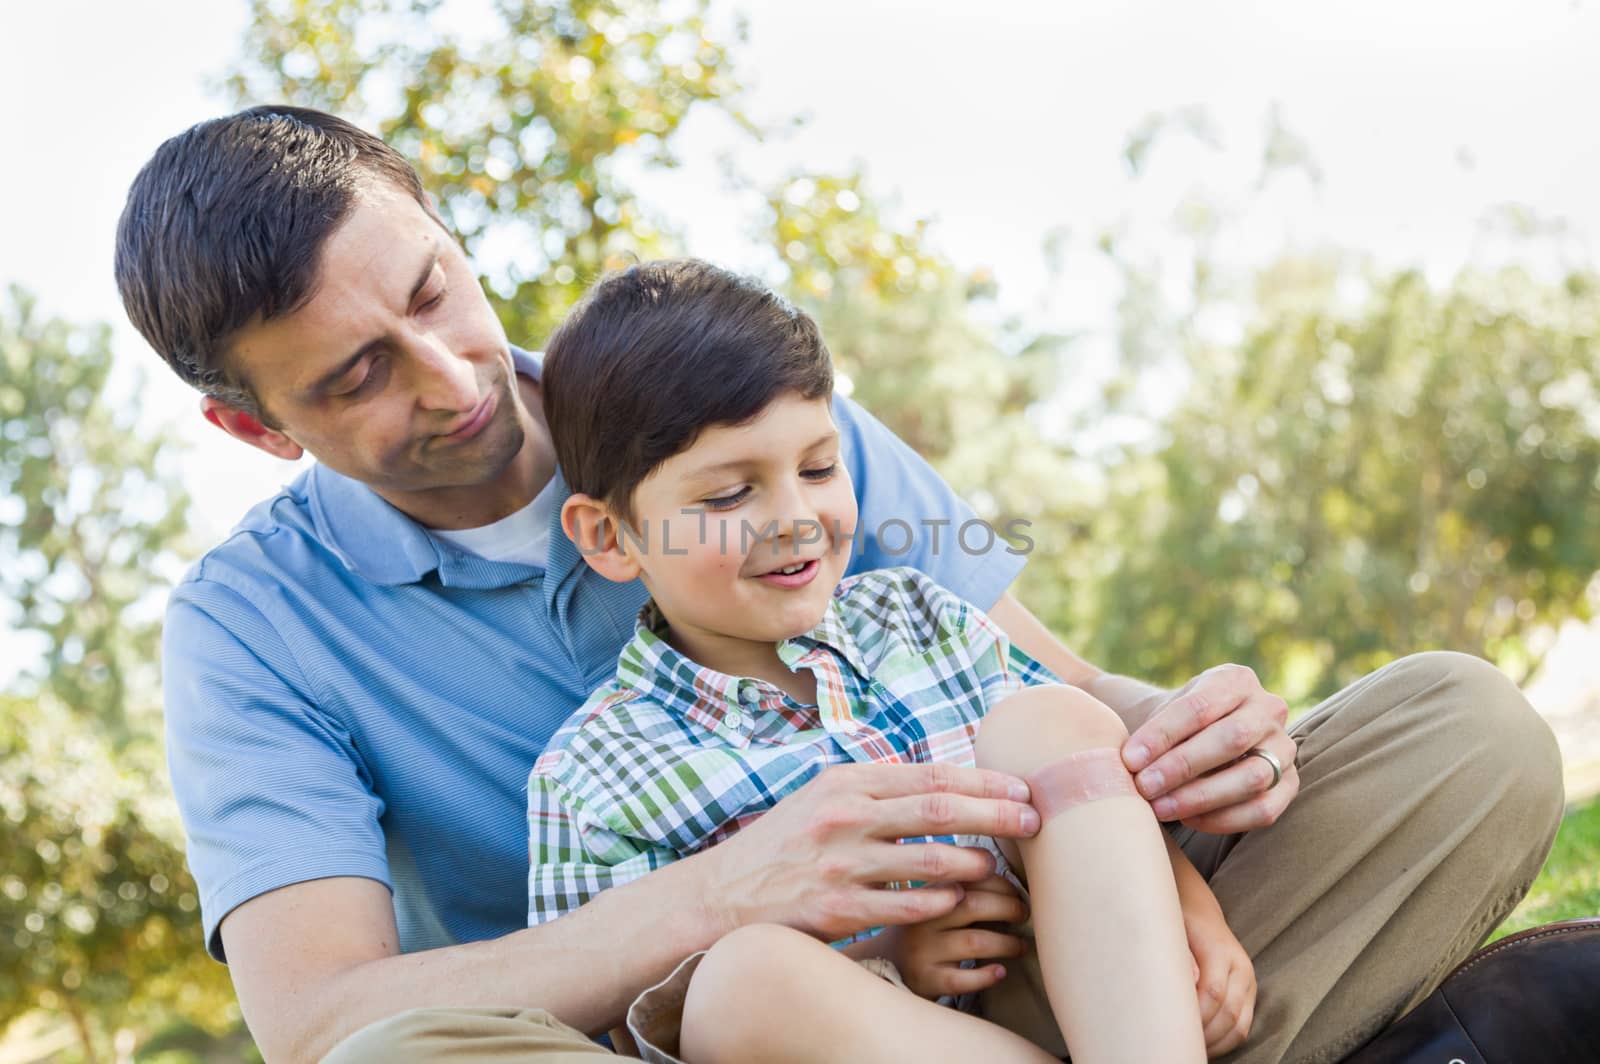 Loving Father Puts a Bandage on the Elbow of His Young Son in the Park. by Feverpitched